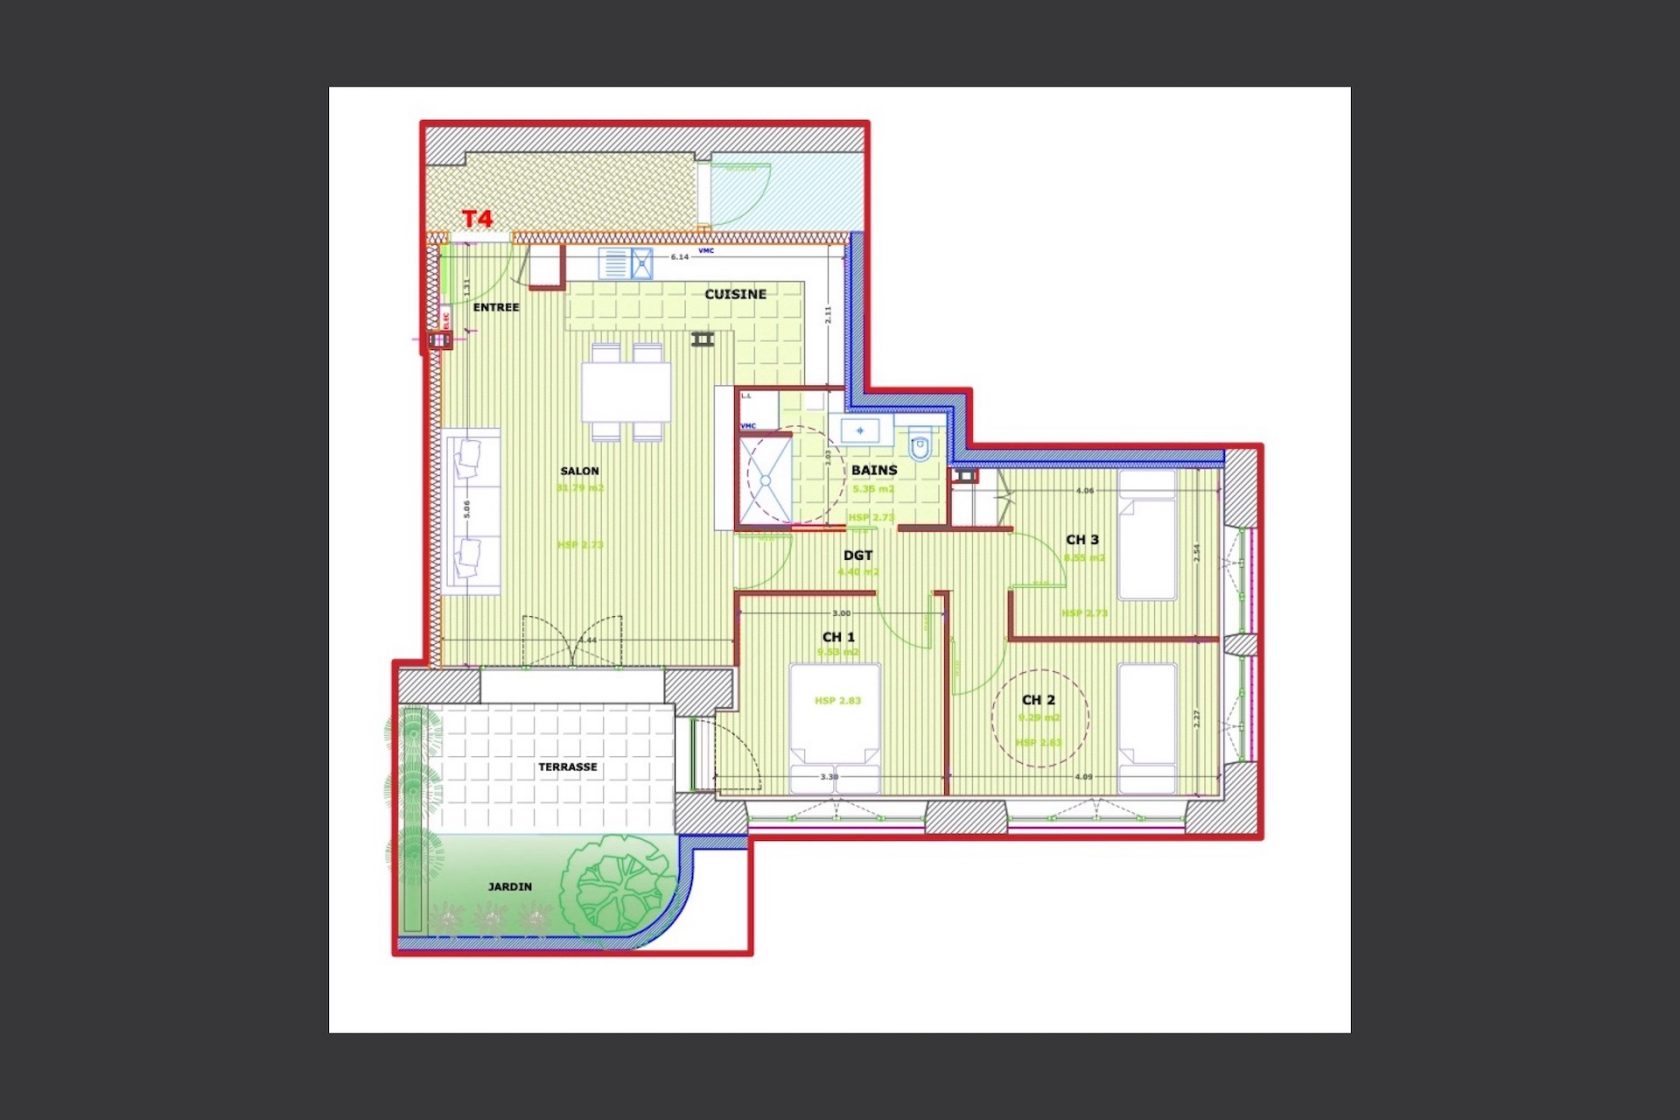 Apartment with terrace (lot 4)